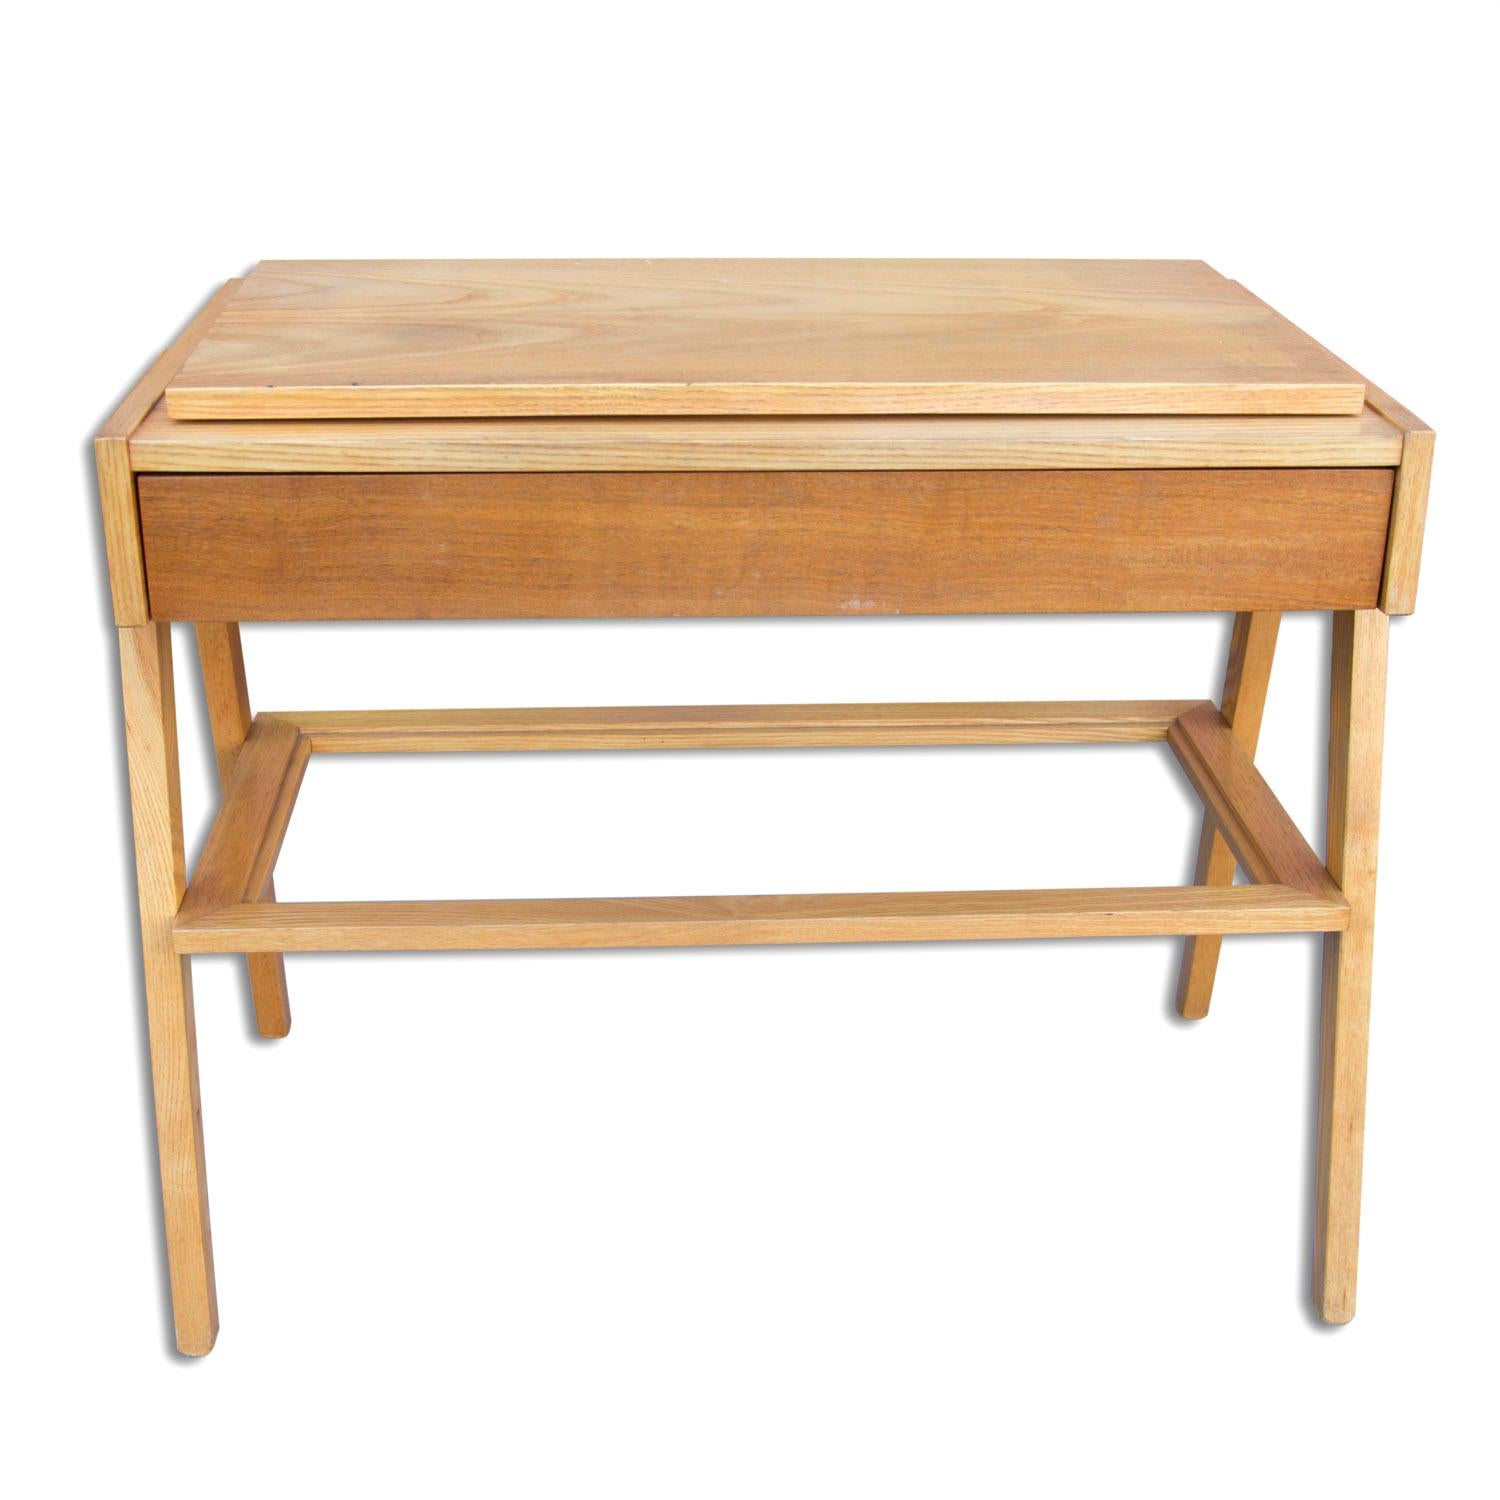 Midcentury positioning TV table. It features a solid oak or ashwood structure and one drawer in walnut. Its design is associated with world-famous EXPO 58 exhibition in Brussels. In very good vintage condition.

   